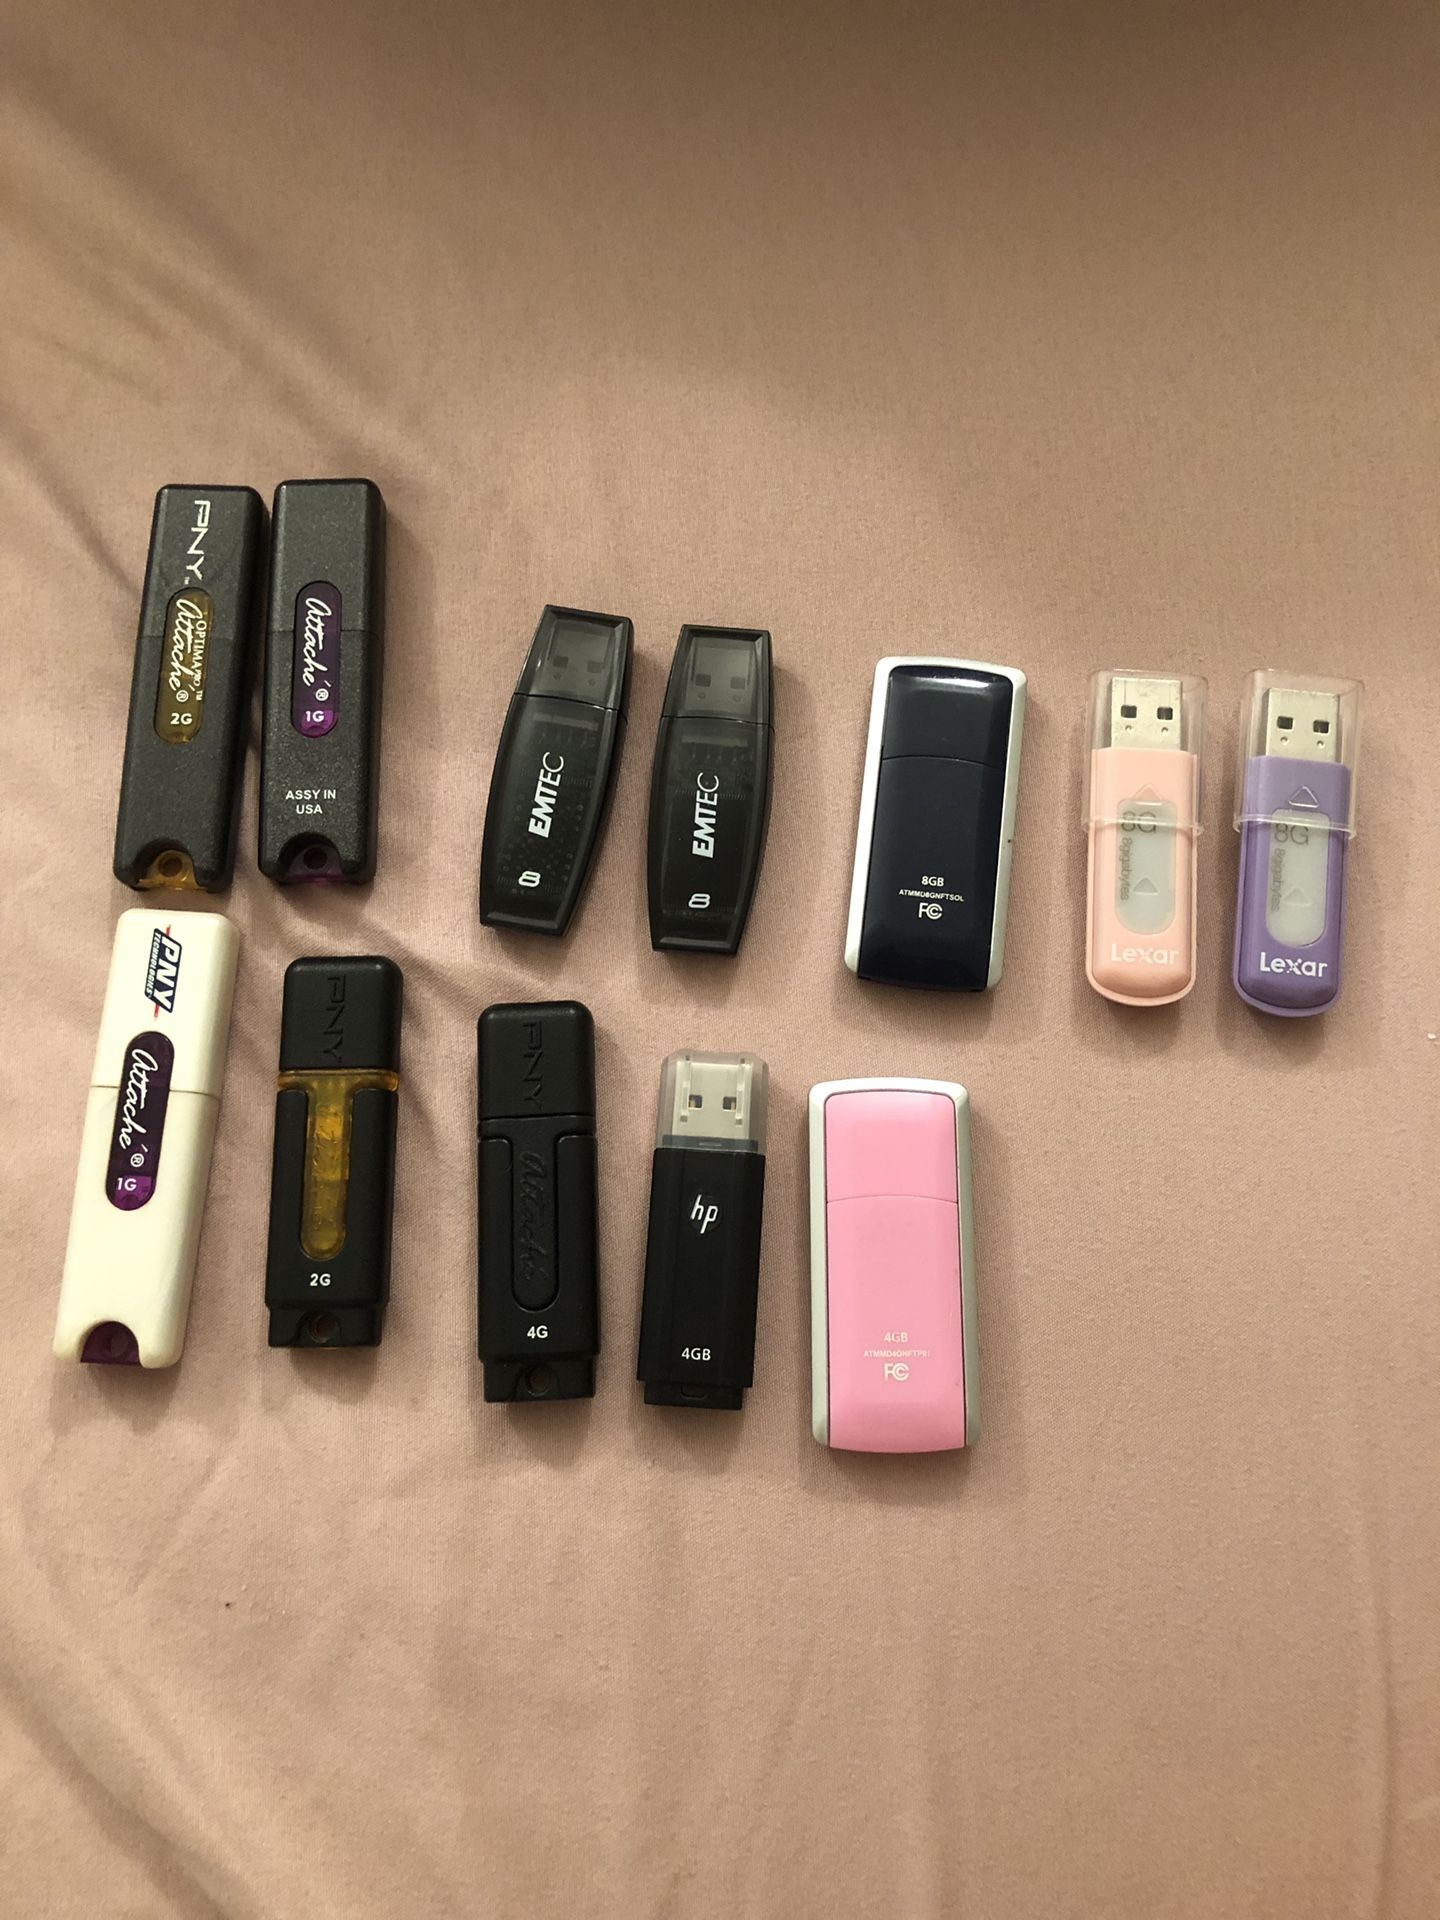 12 USB Flash Drives - All Together